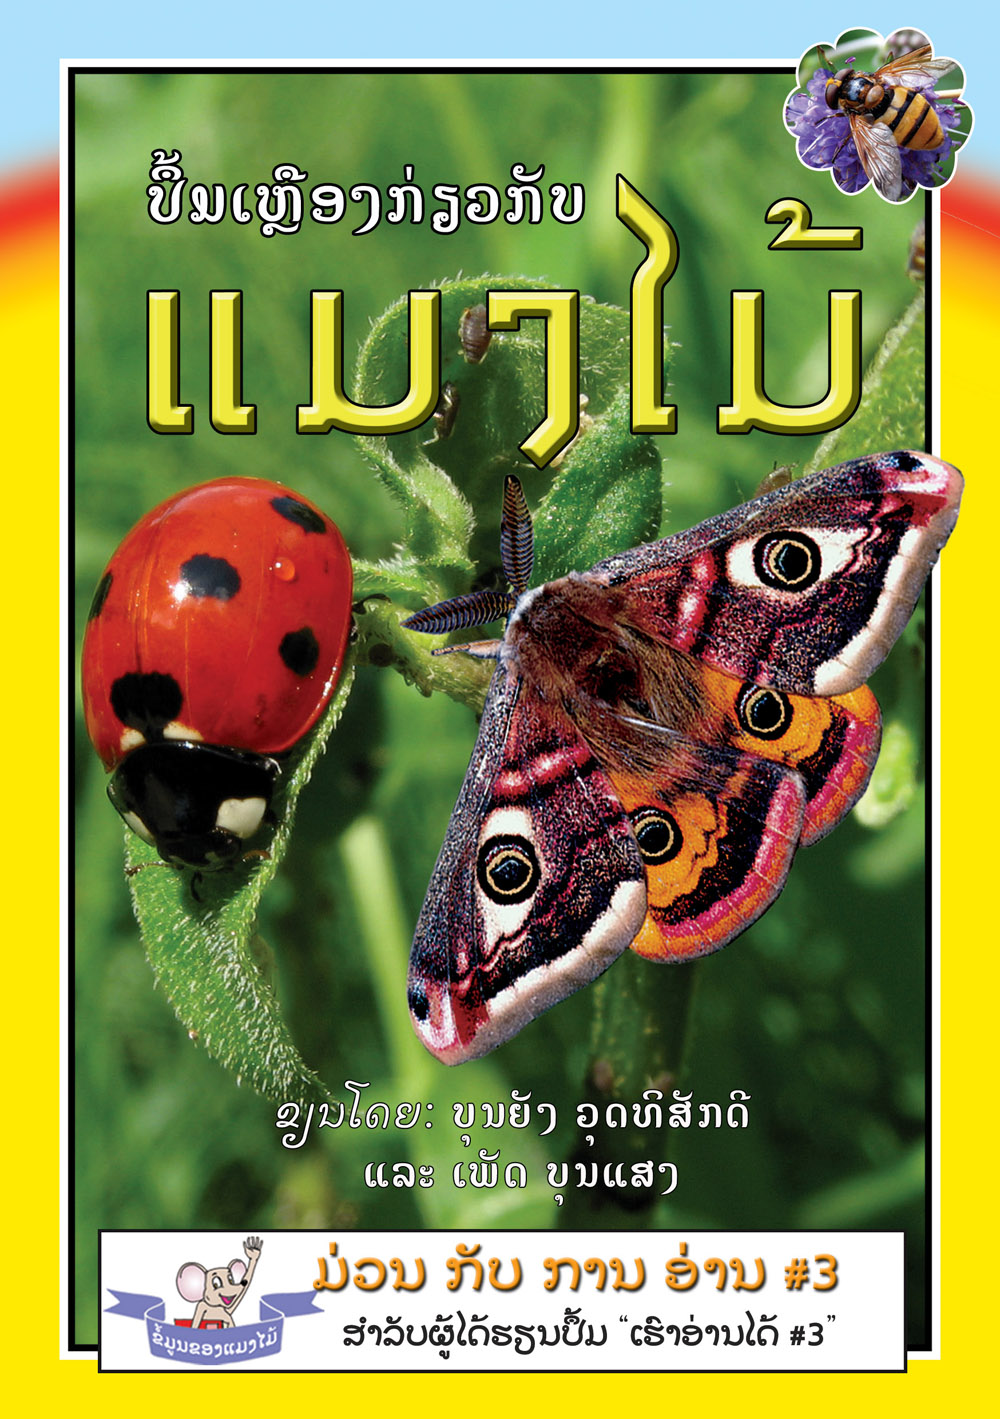 Yellow Book about Insects large book cover, published in Lao language